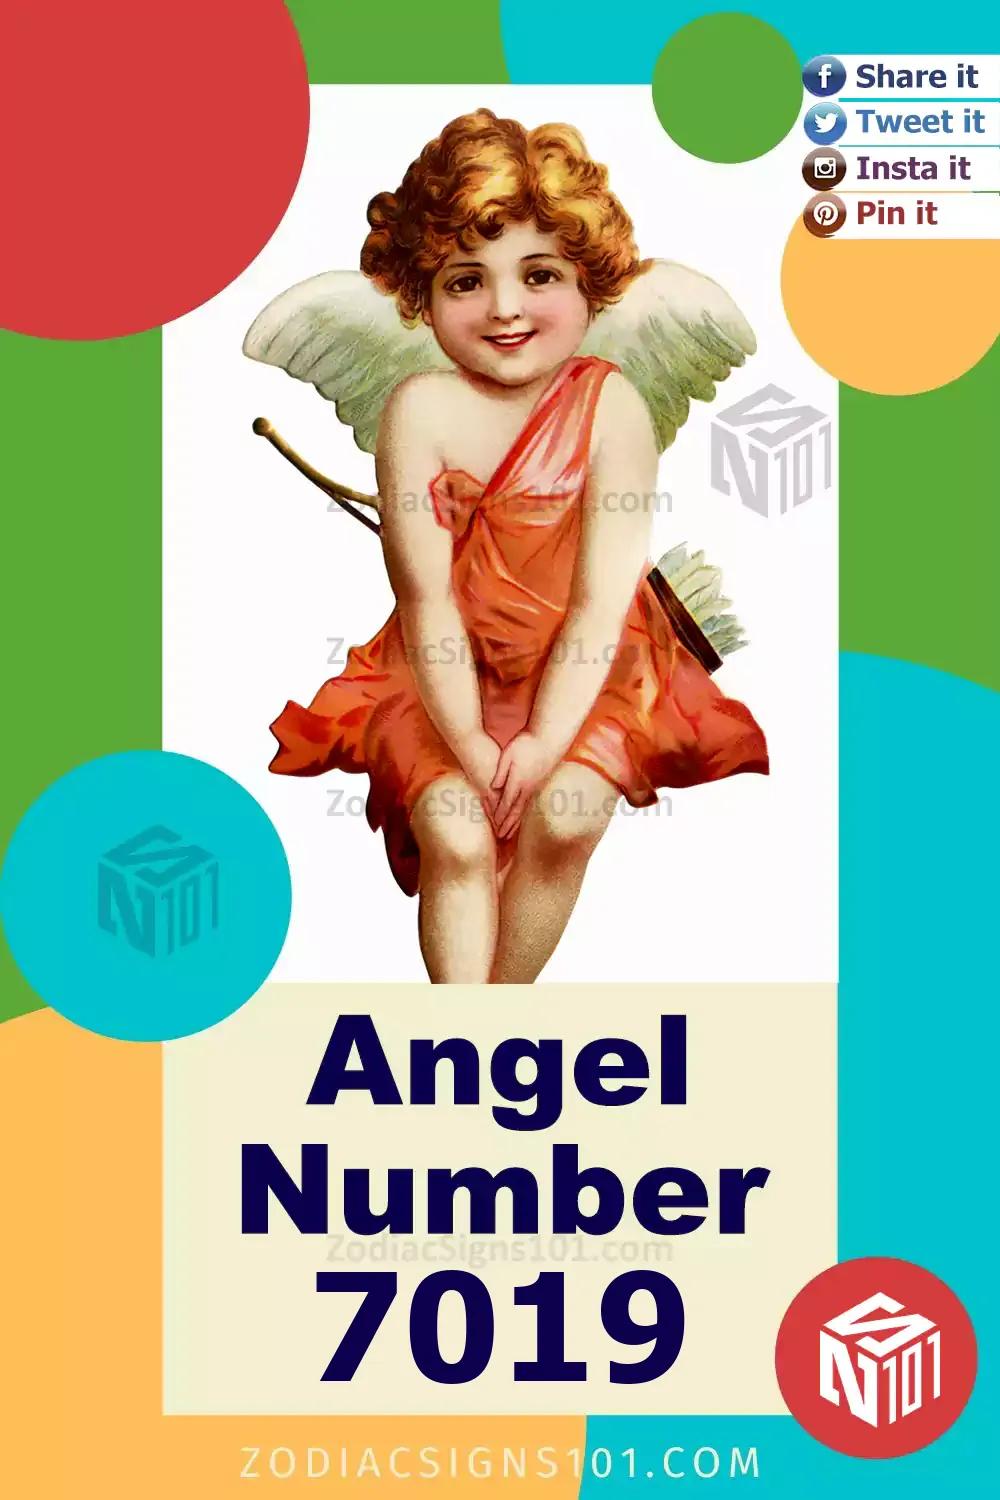 7019 Angel Number Meaning